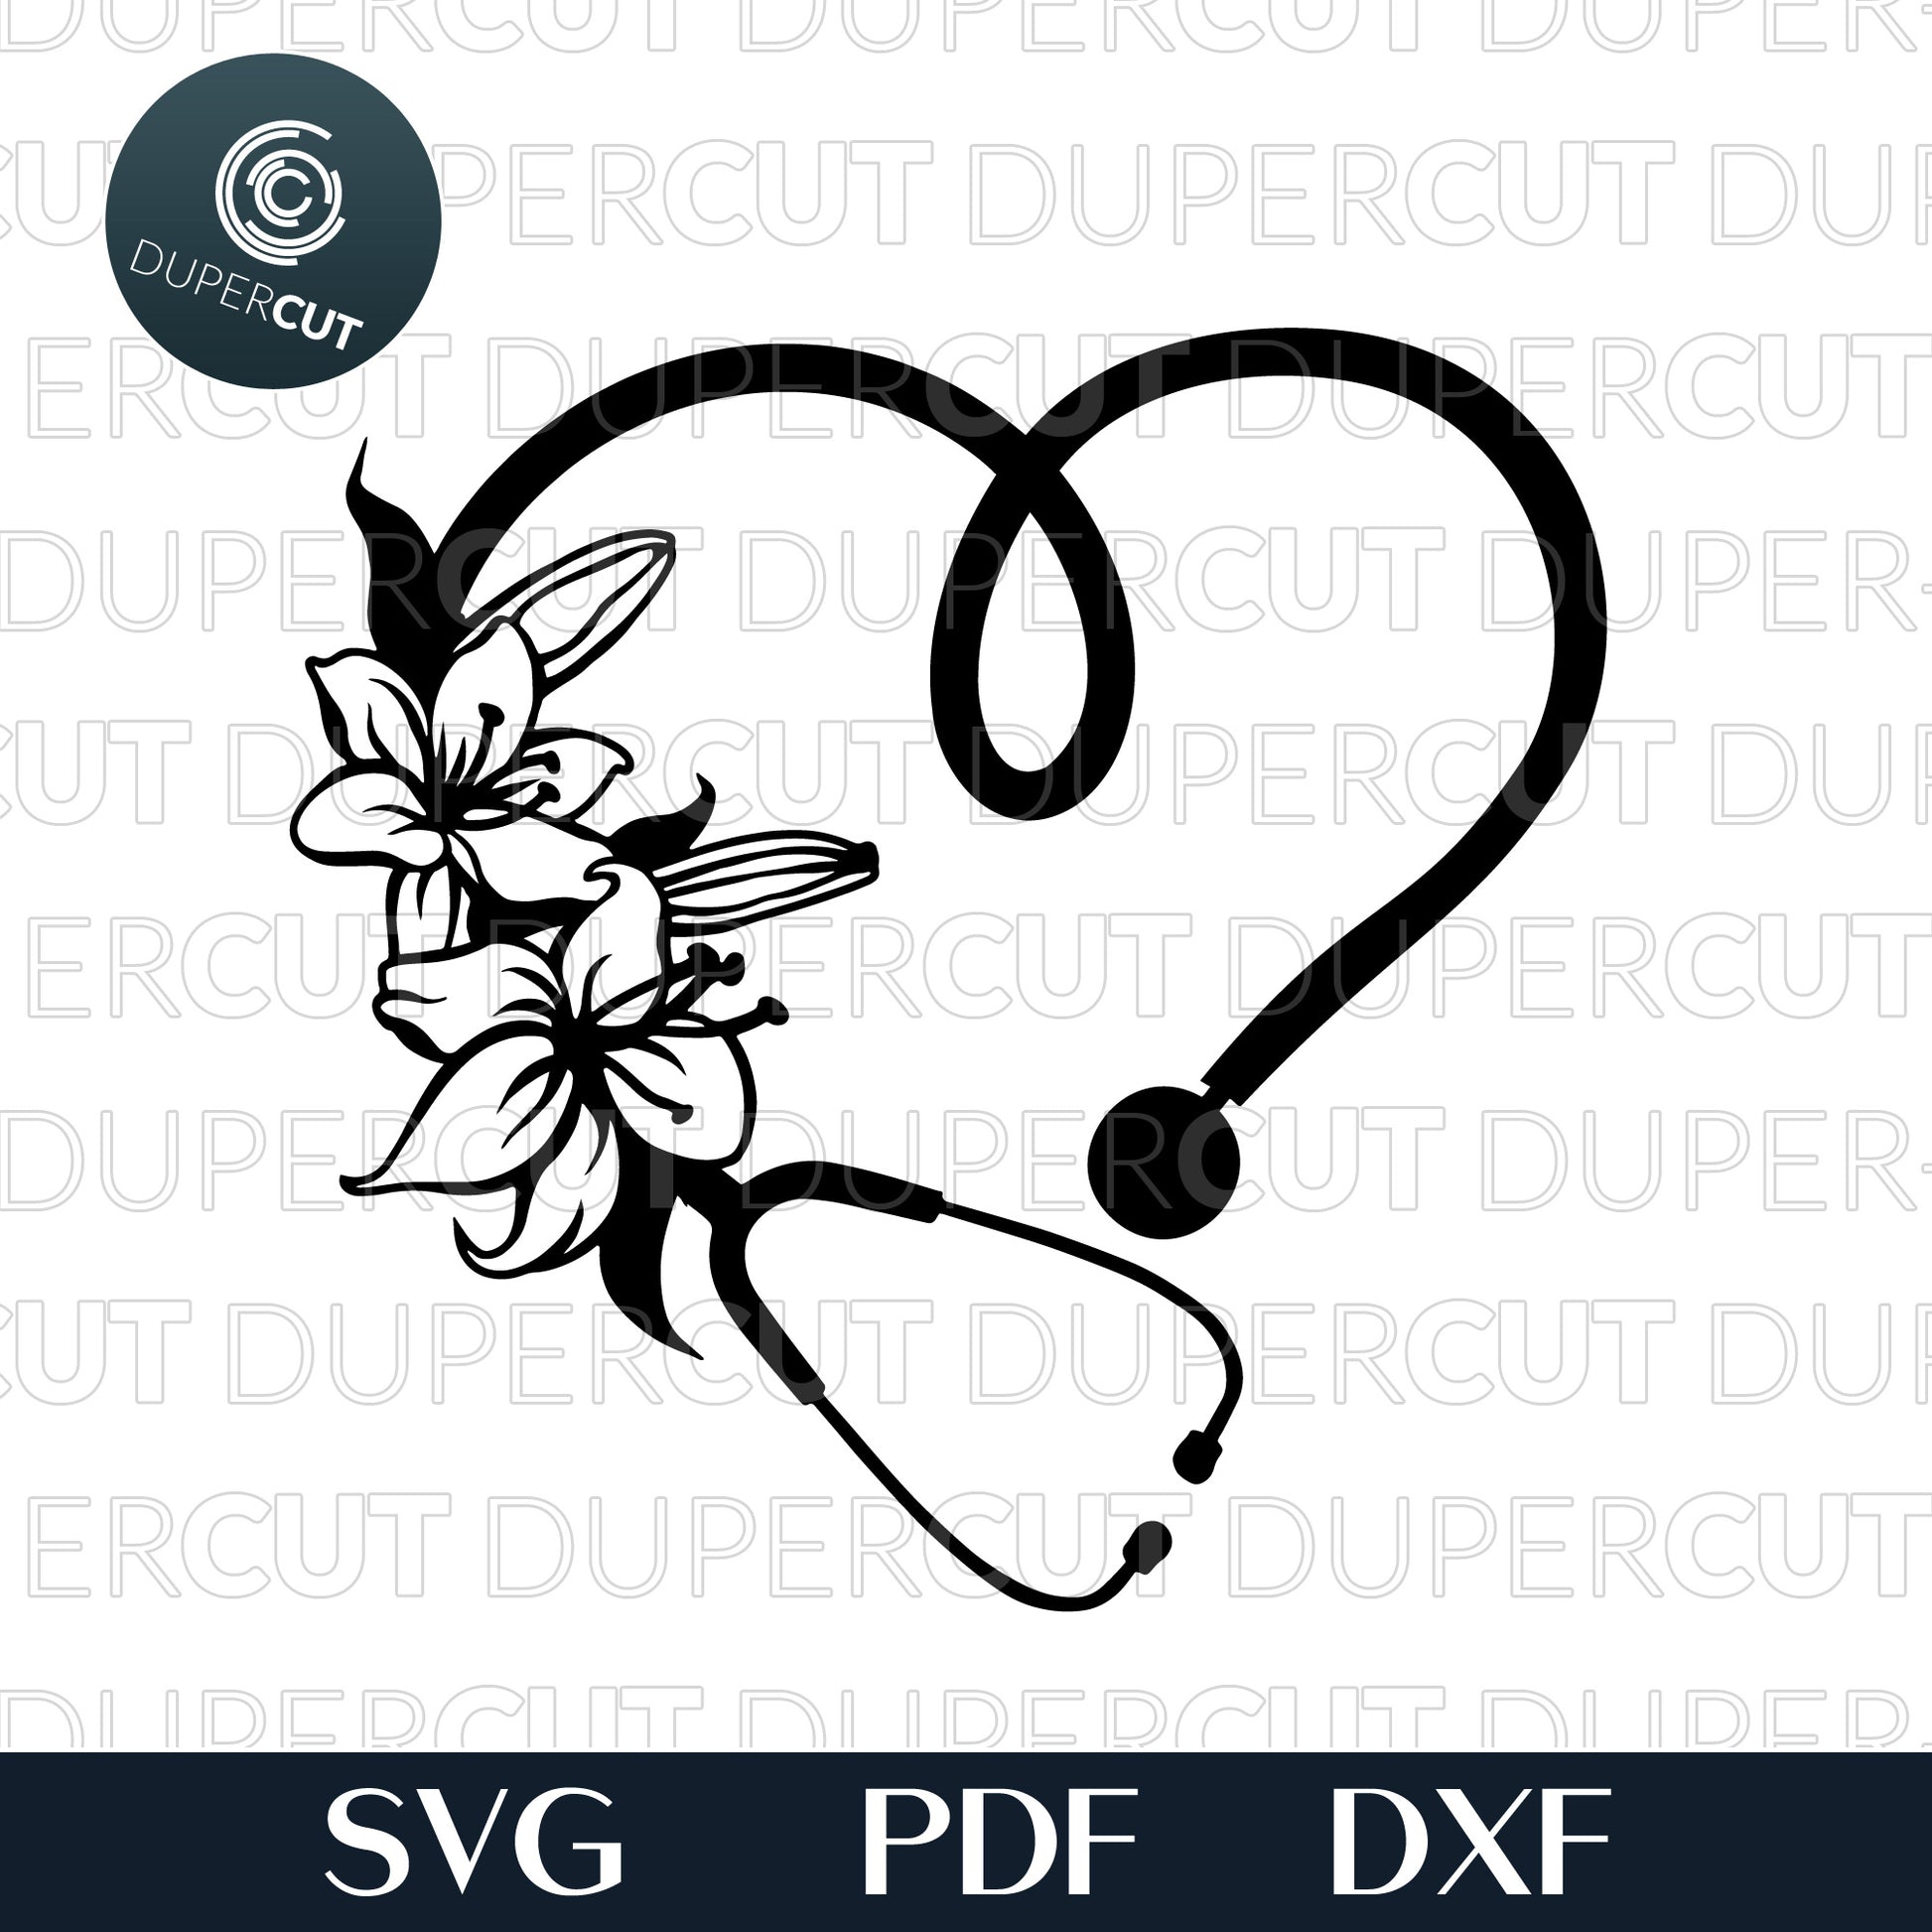 Floral Stethoscope, commercial license nursing  template - SVG DXF PNG files for Cricut, Glowforge, Silhouette Cameo, CNC Machines